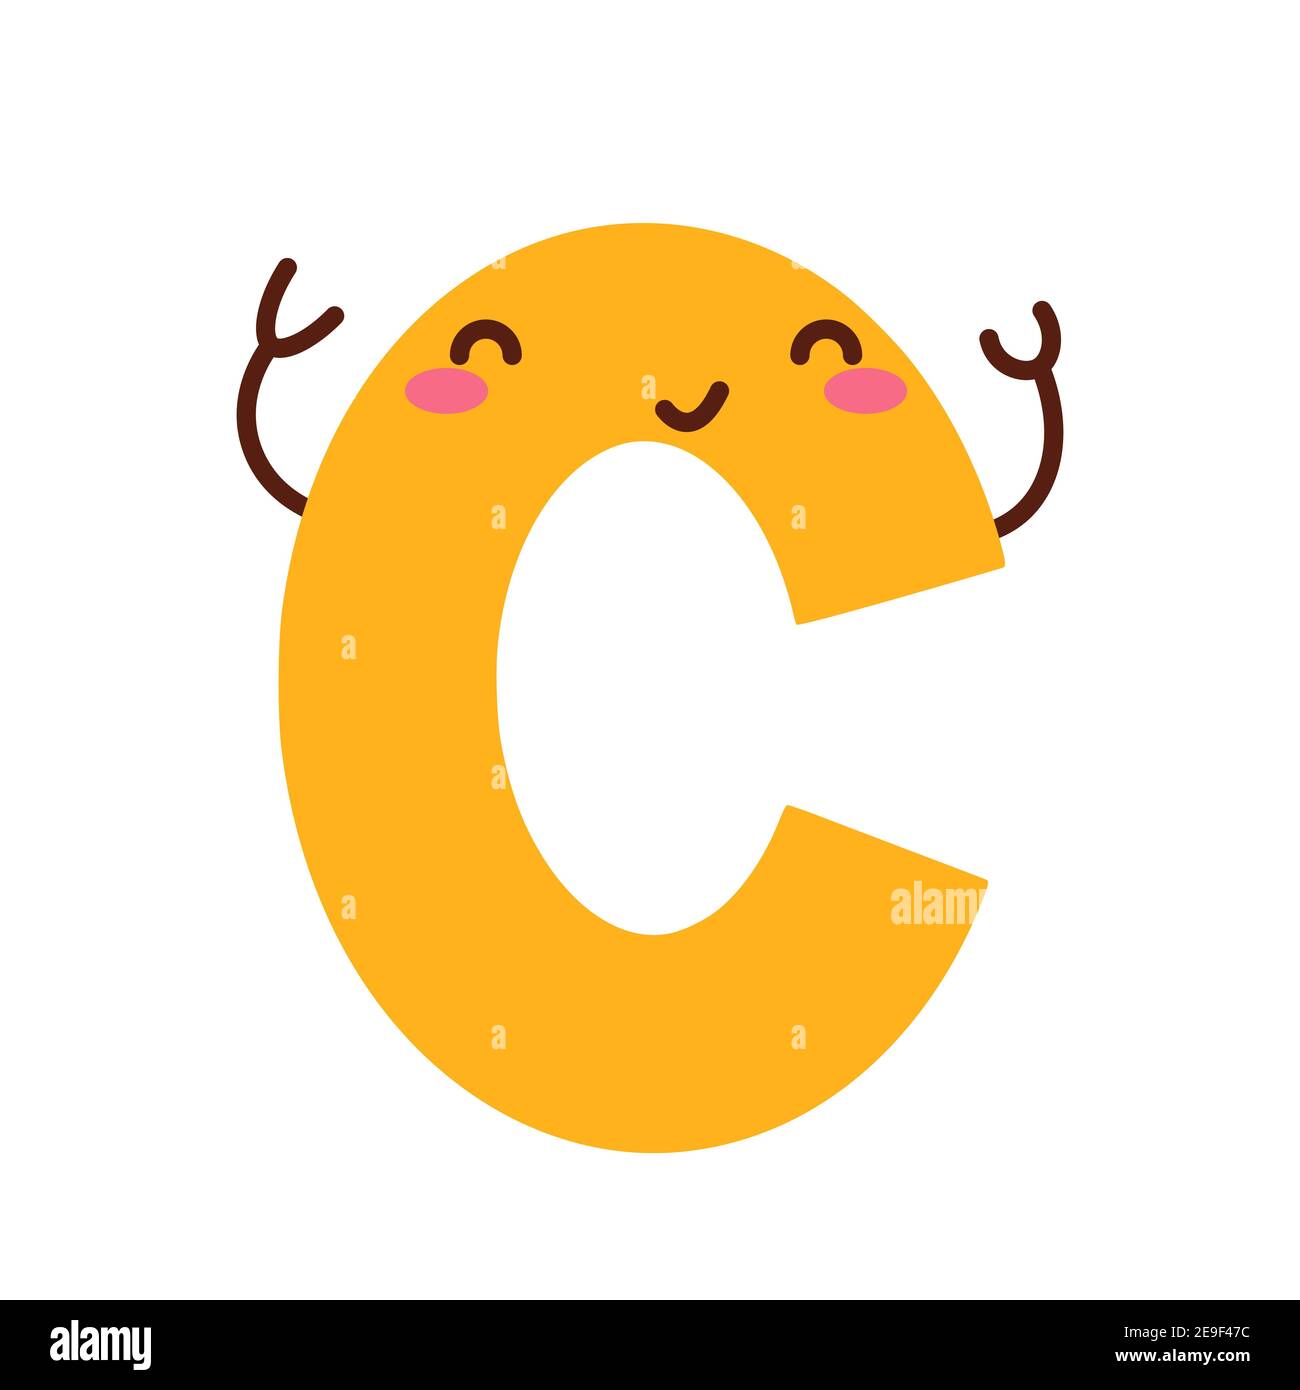 Letter C. Funny character with cute face. Design for kids room